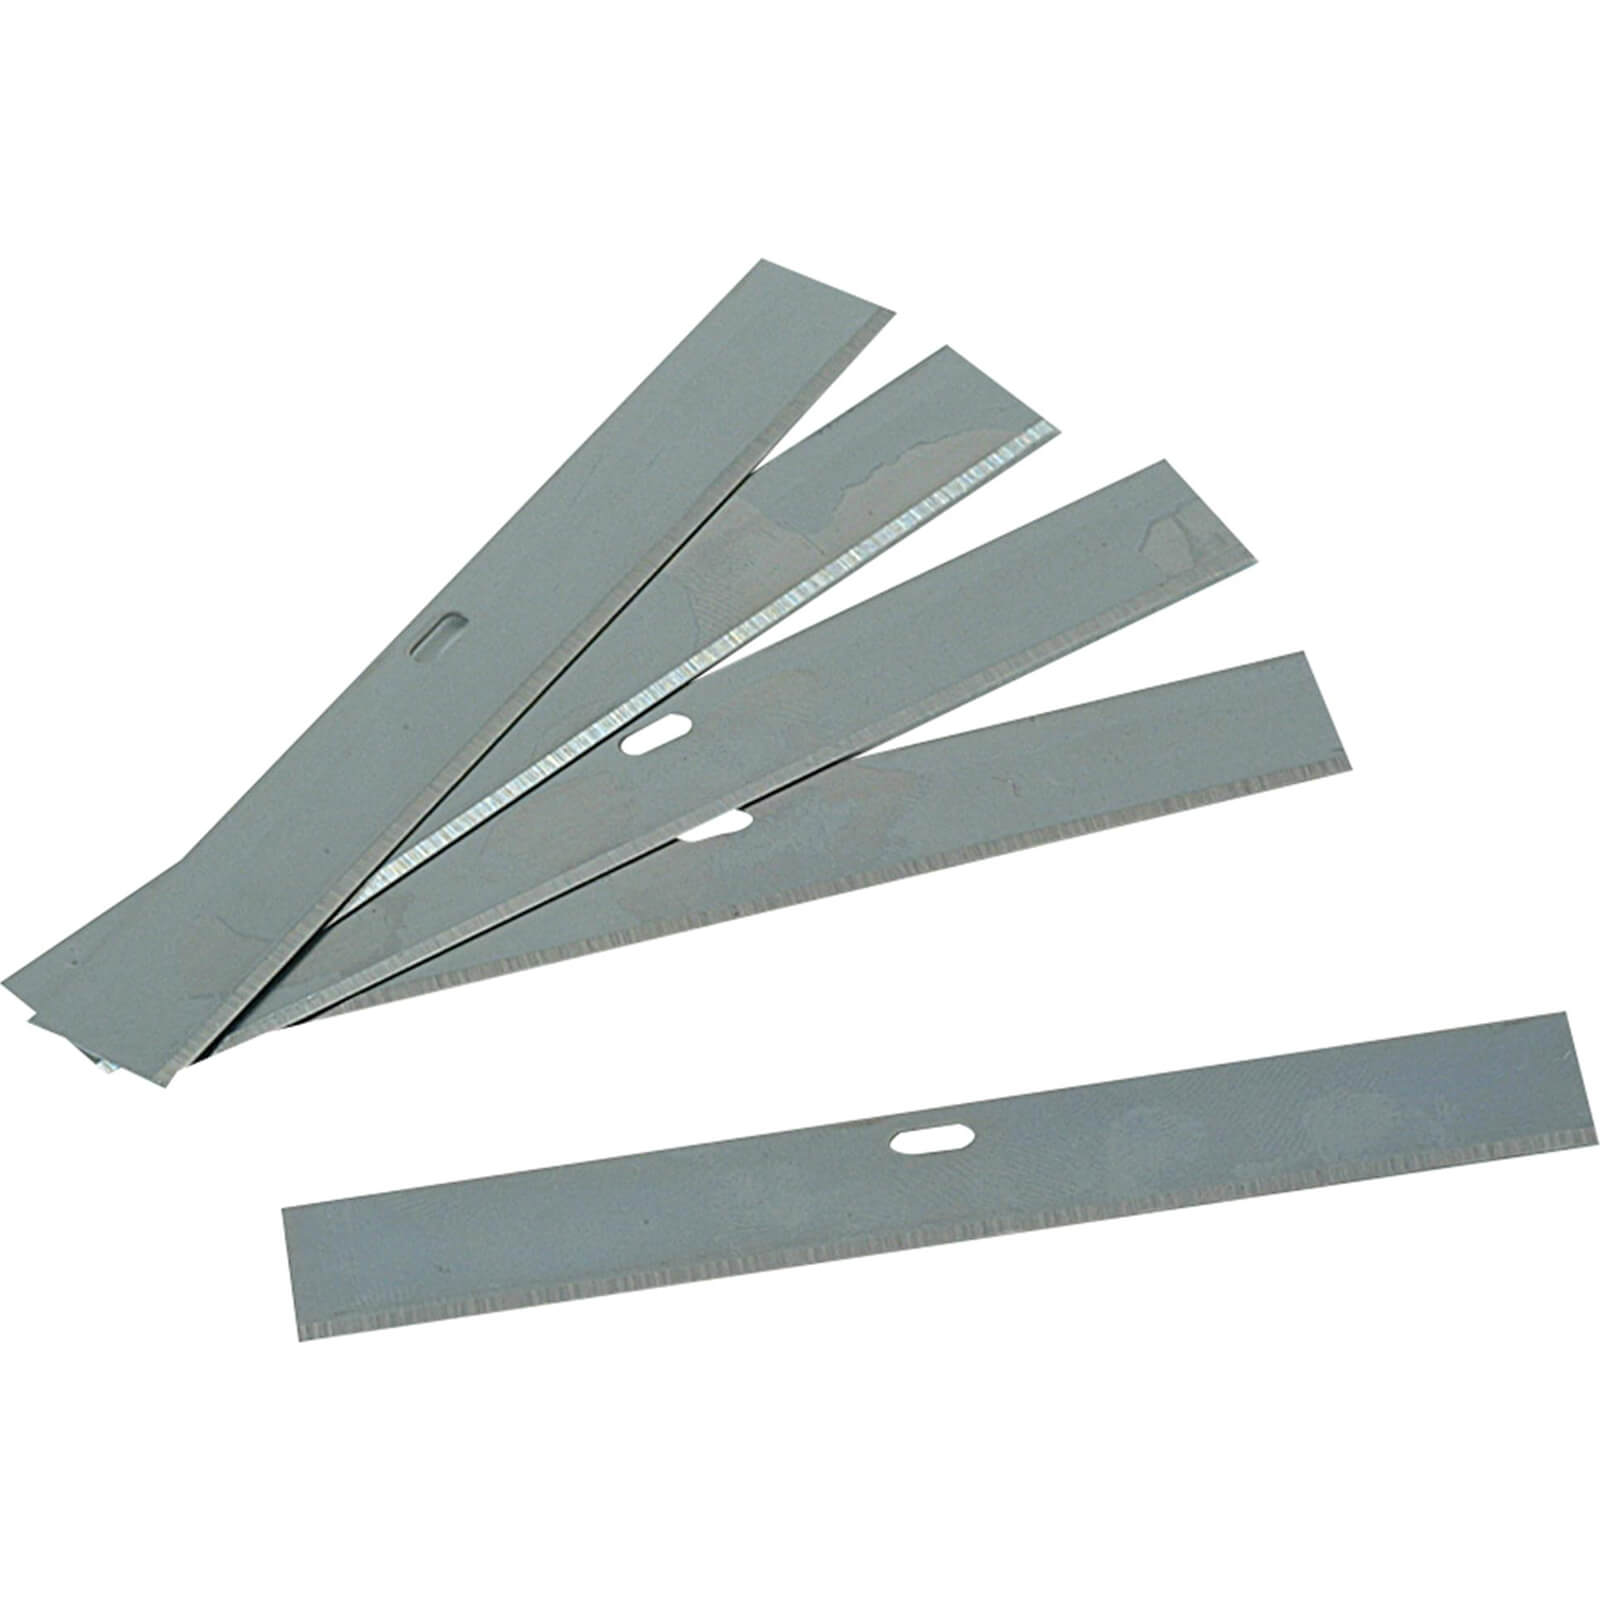 Photos - Other for Construction Stanley Heavy Duty Scraper Blades Pack of 5 